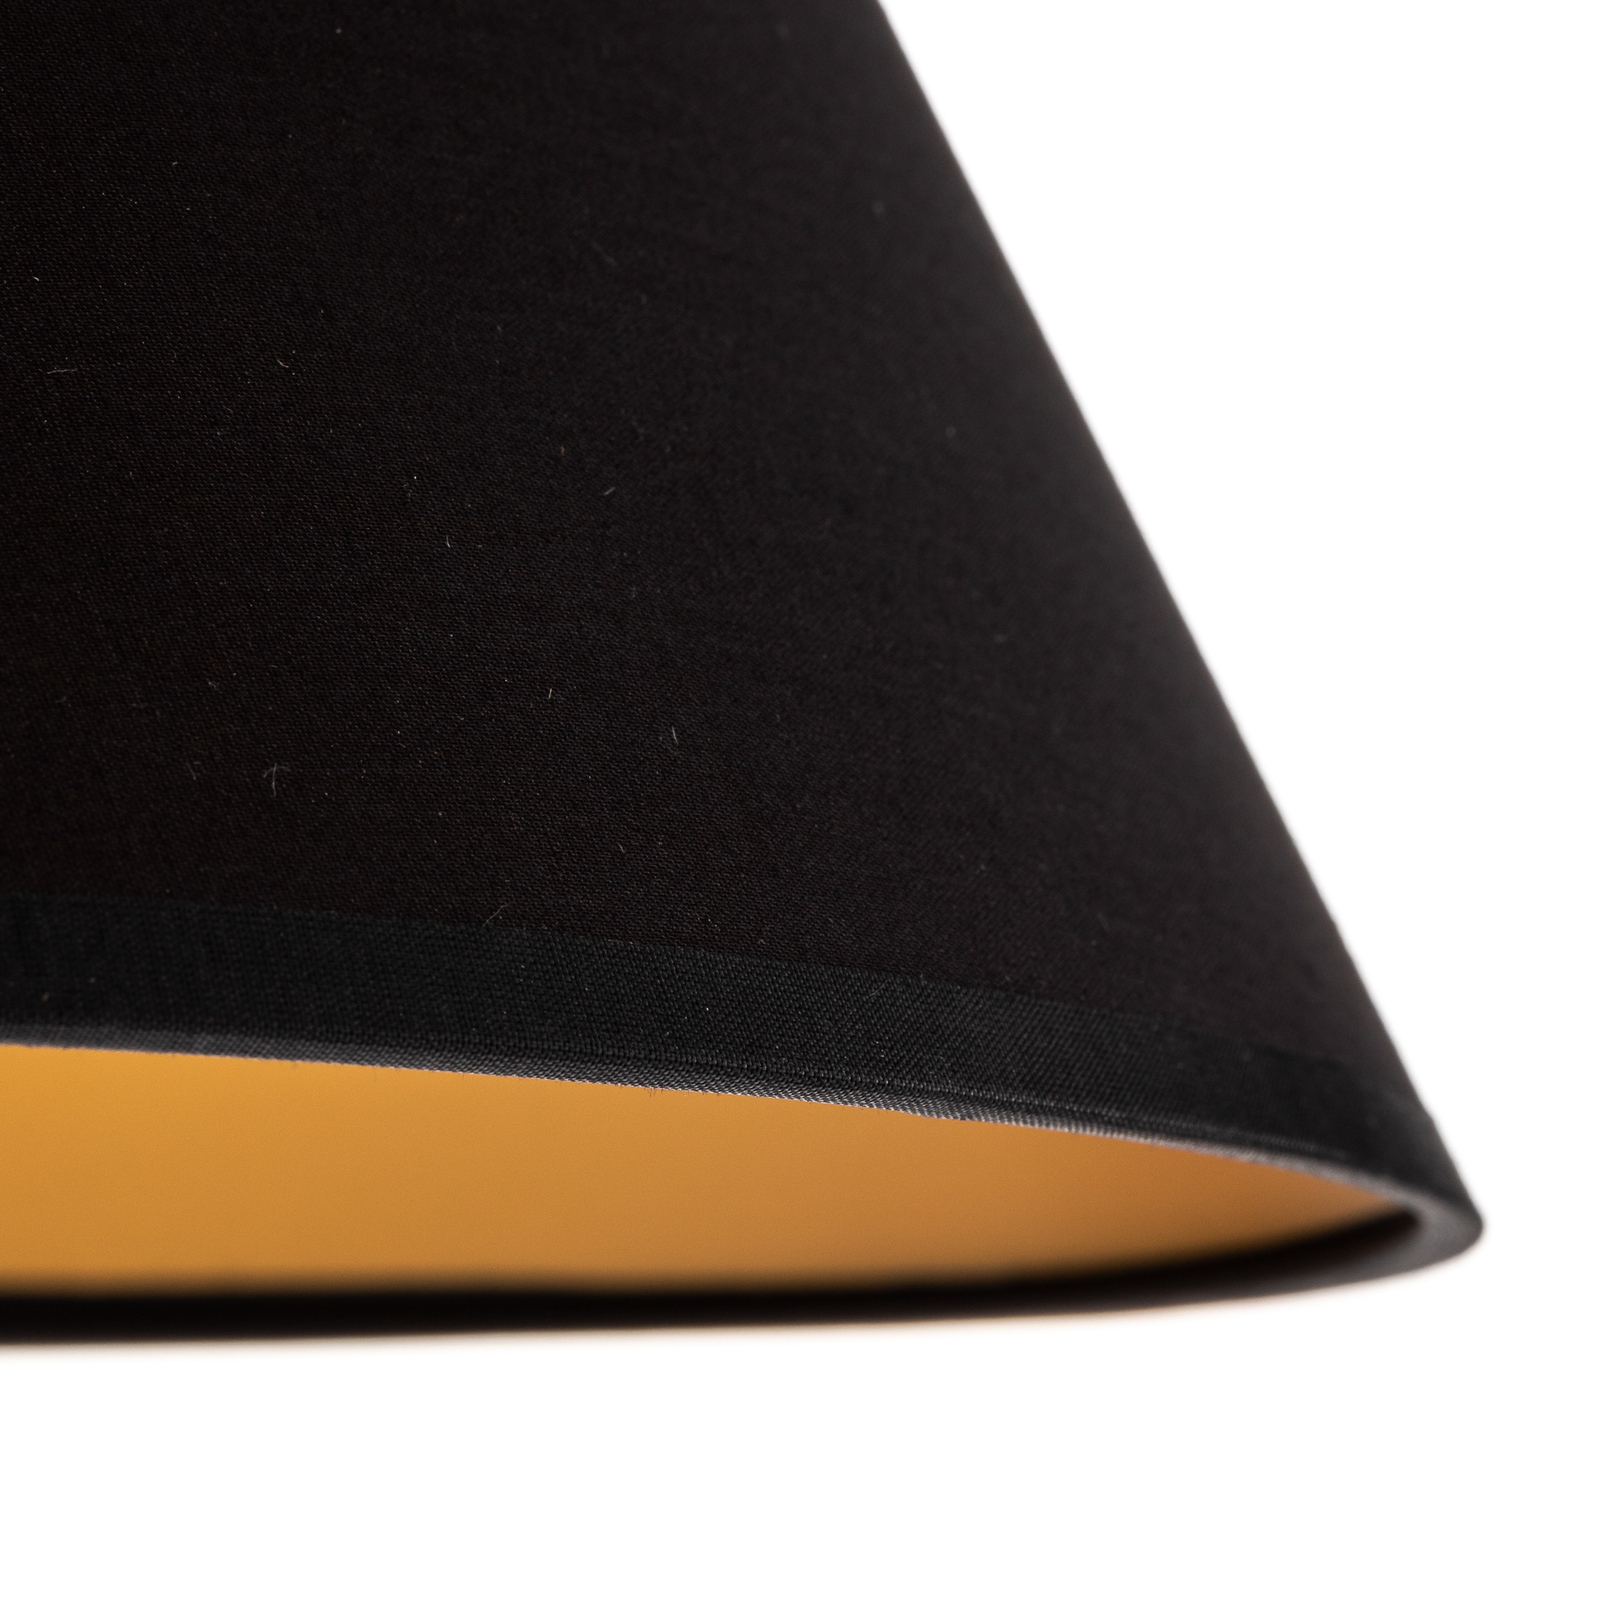 Table lamp TABLE, conical lampshade black-gold